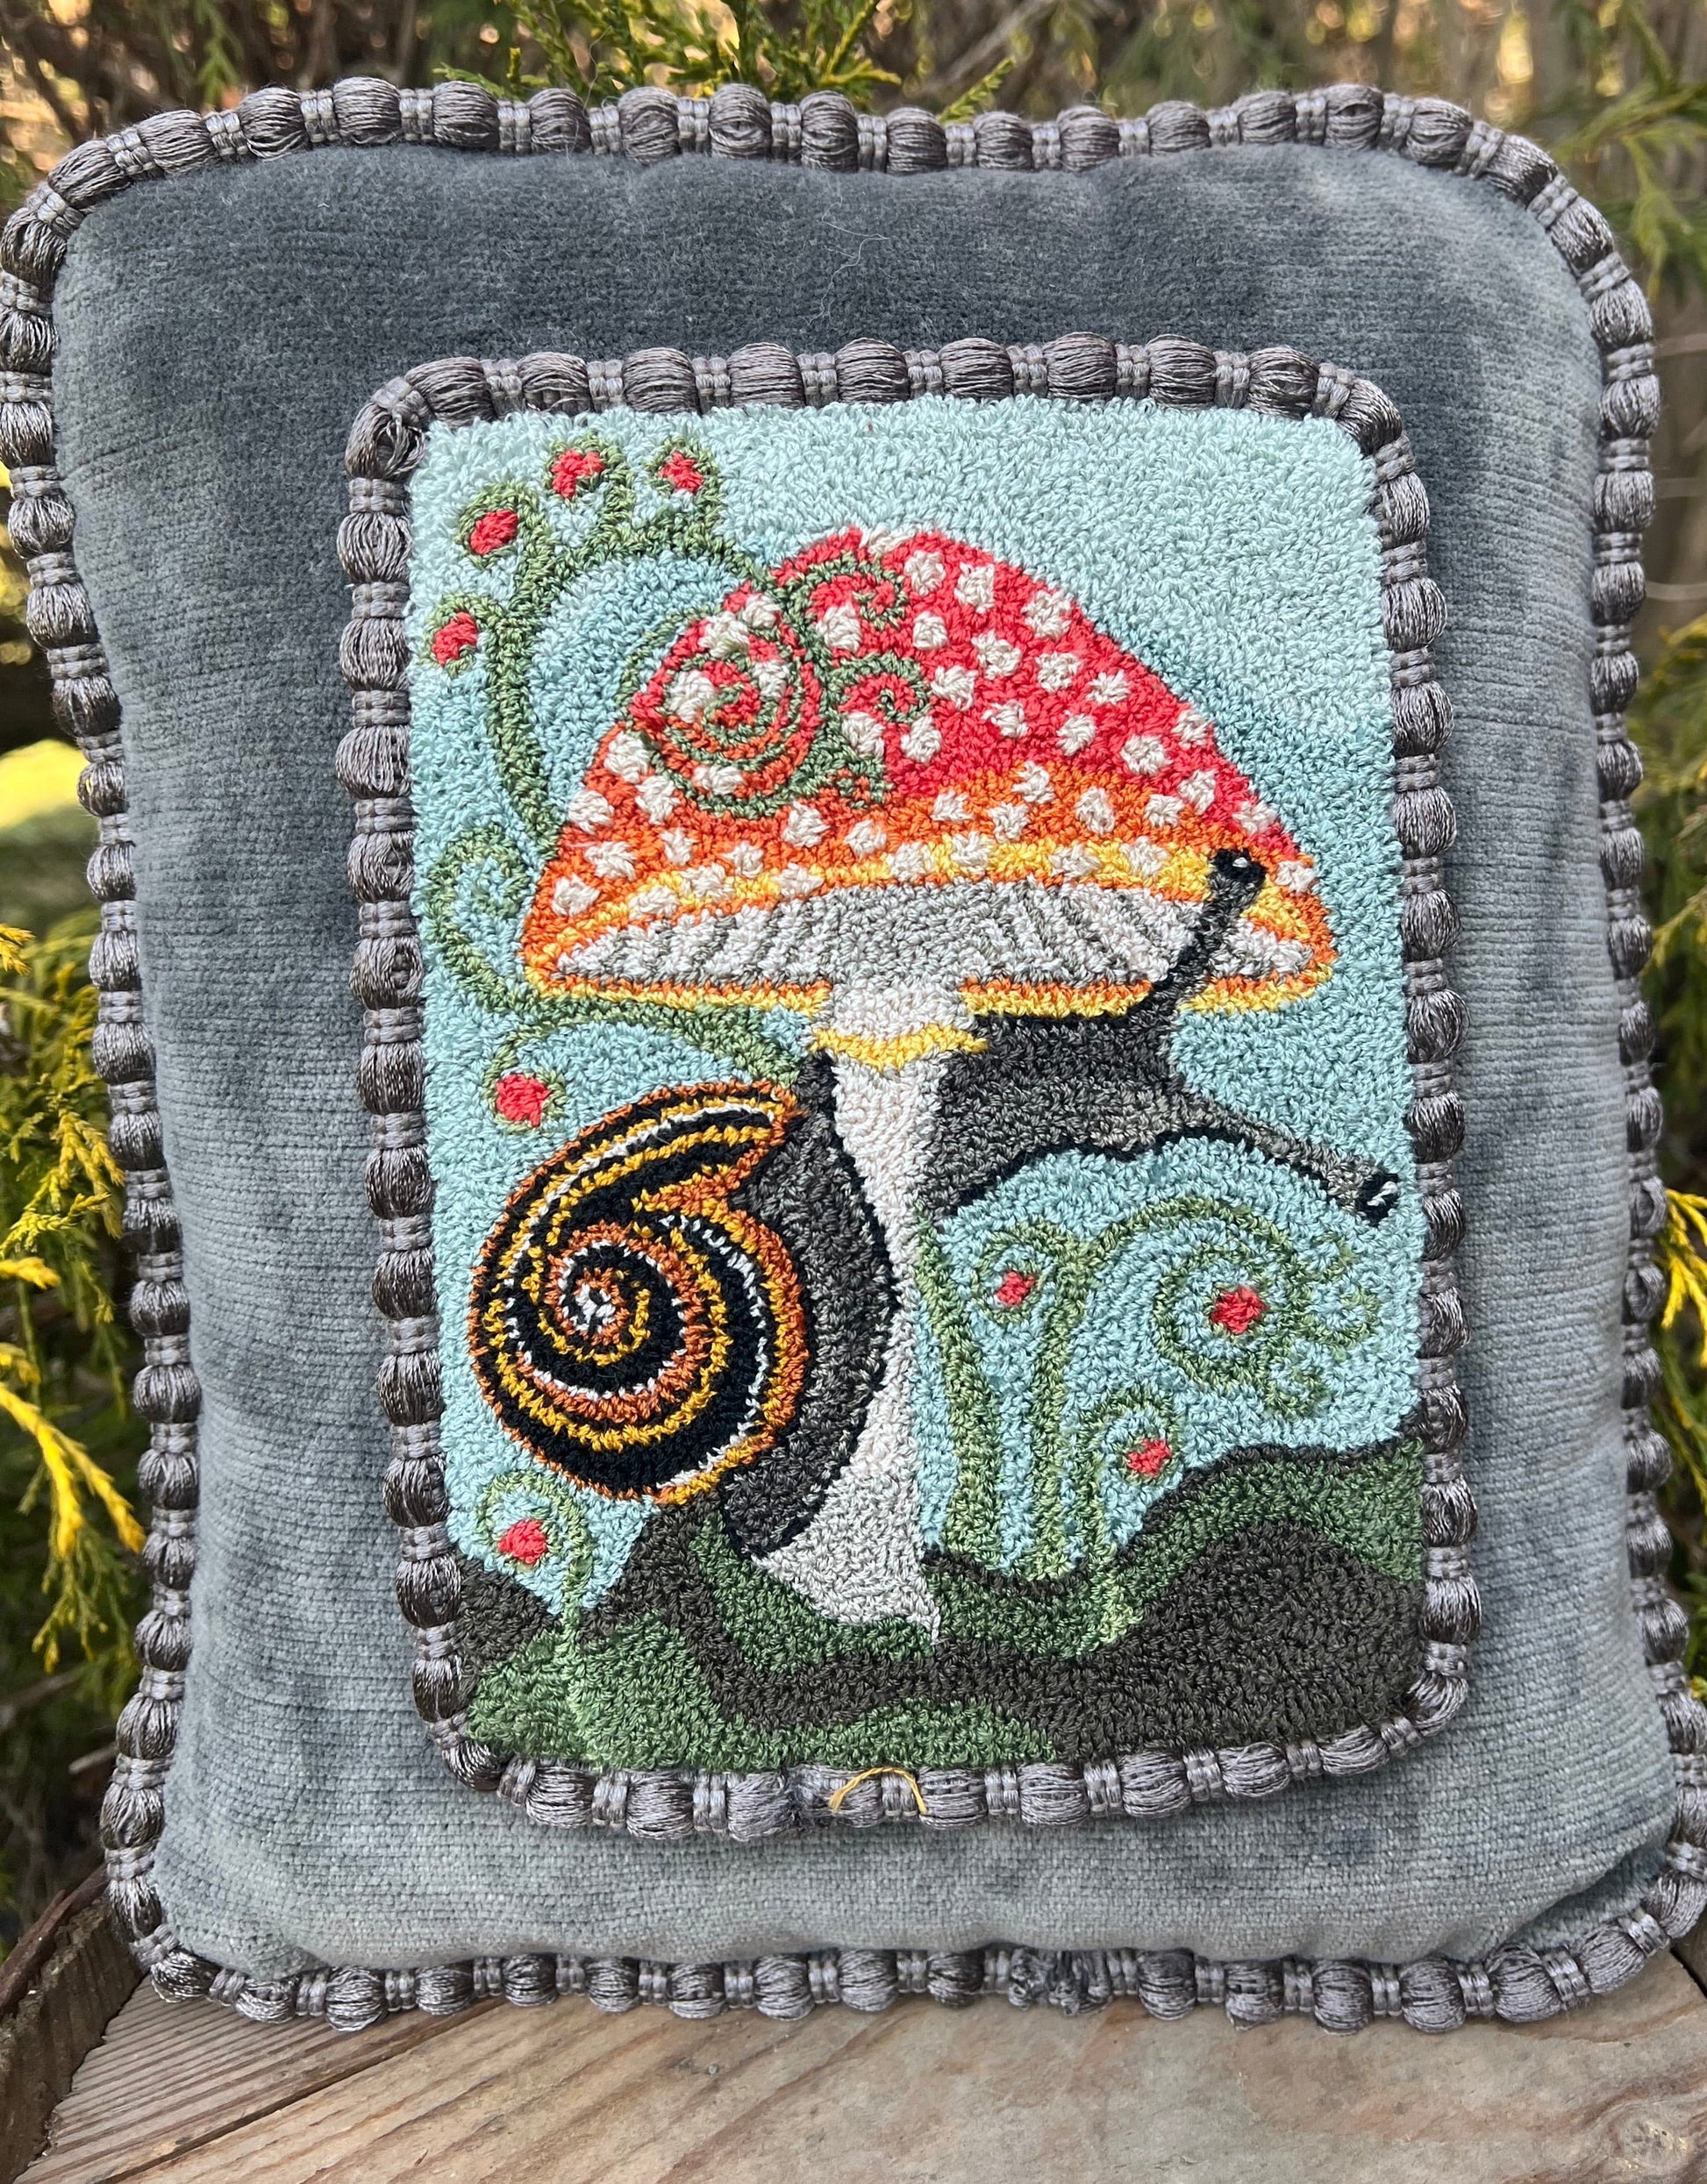 The Pattern Entwined is an PDF digial downloadable punch Needle Embroidery pattern that used thread and a punch needle to create the design. Entwined design depicts a snail wrapping itself around a colorful mushroom. Copyright © 2024 Kelly Kanyok of Orphaned Wool.